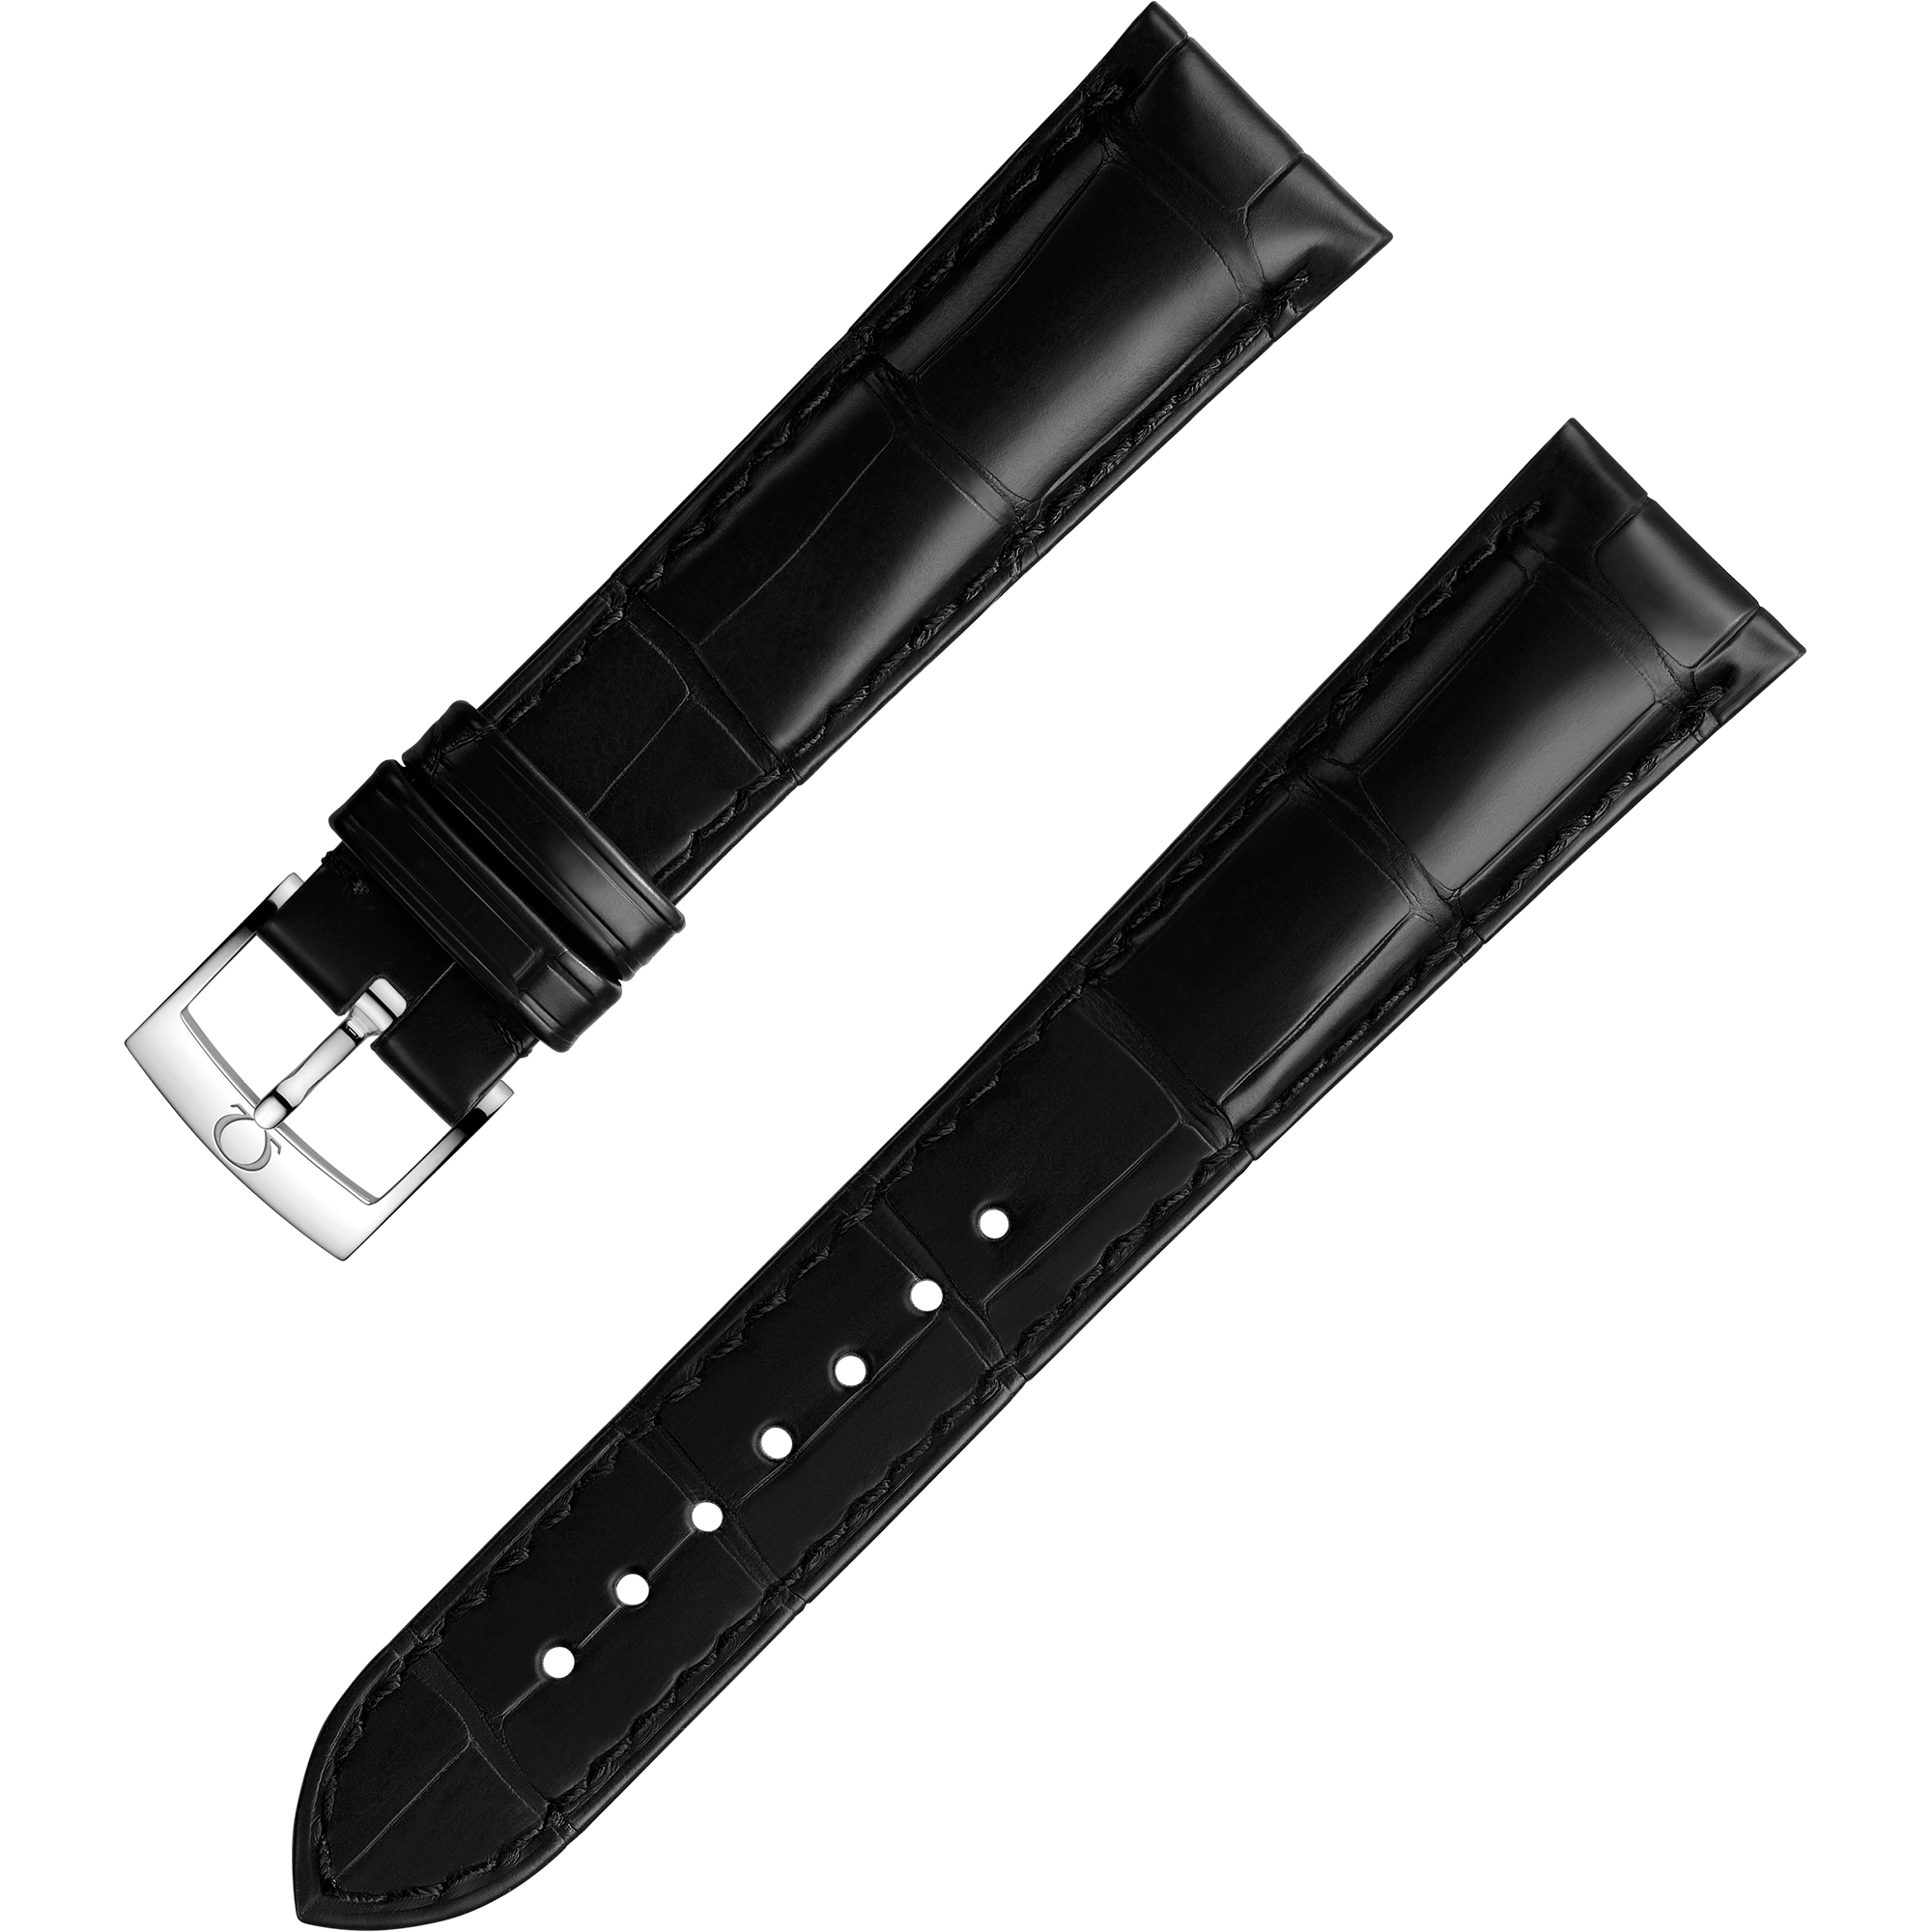 Two-piece strap - Black alligator leather strap with pin buckle - 98000014W